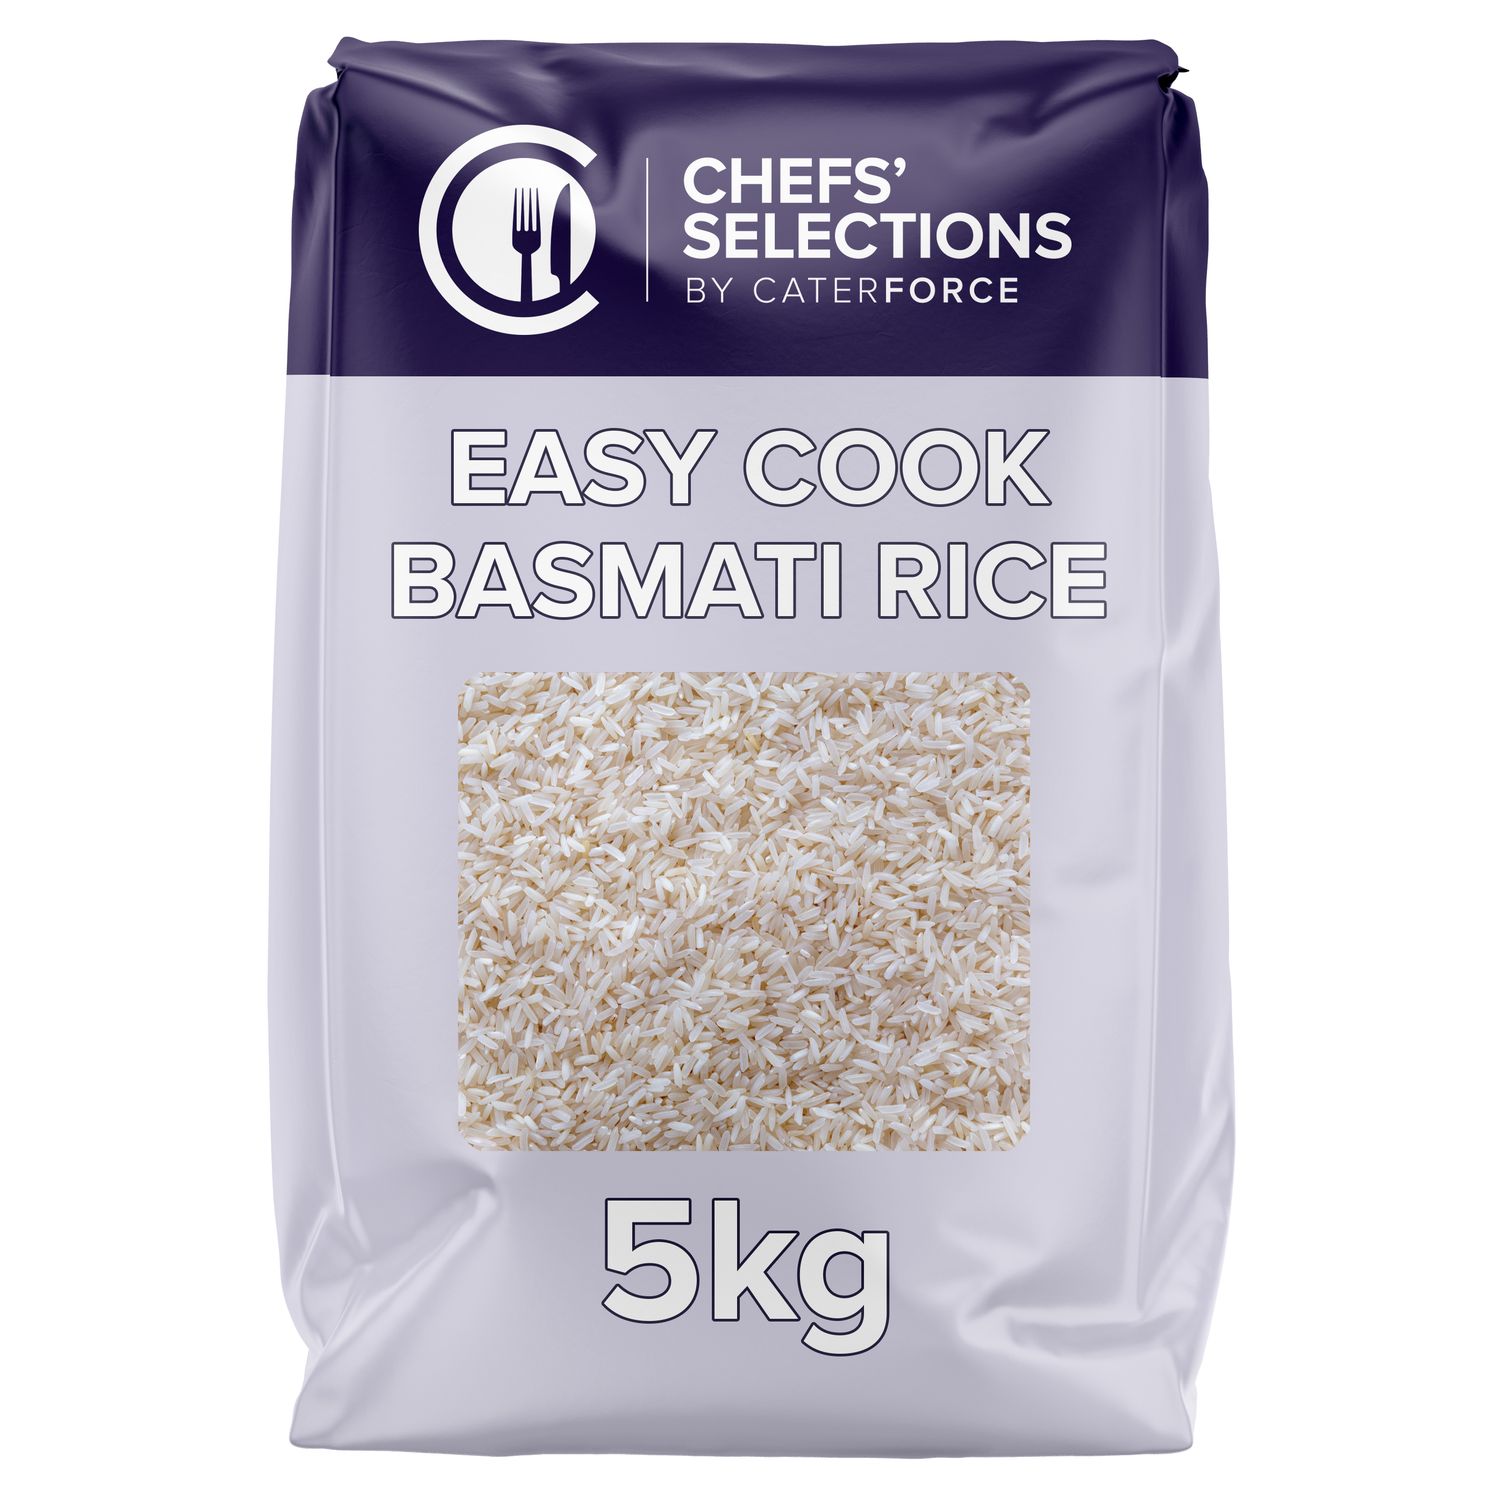 Chefs’ Selections Easy Cook Basmati Rice (1 x 5kg)